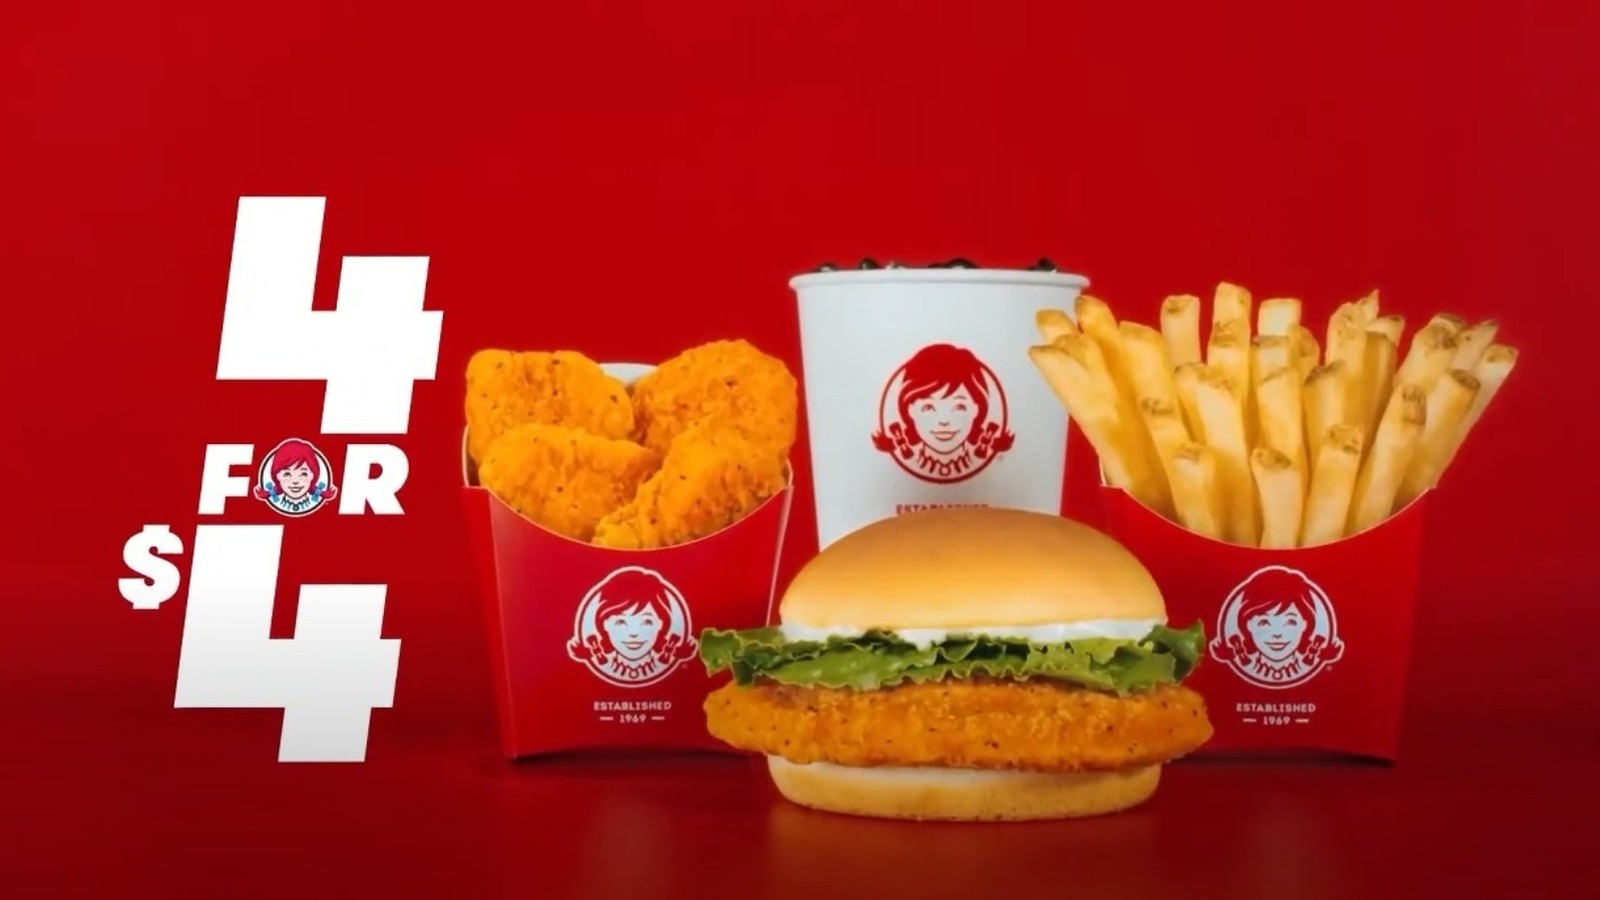 Wendy’s Deals & Specials in 2022 Wendy's 2 for 5 is back!